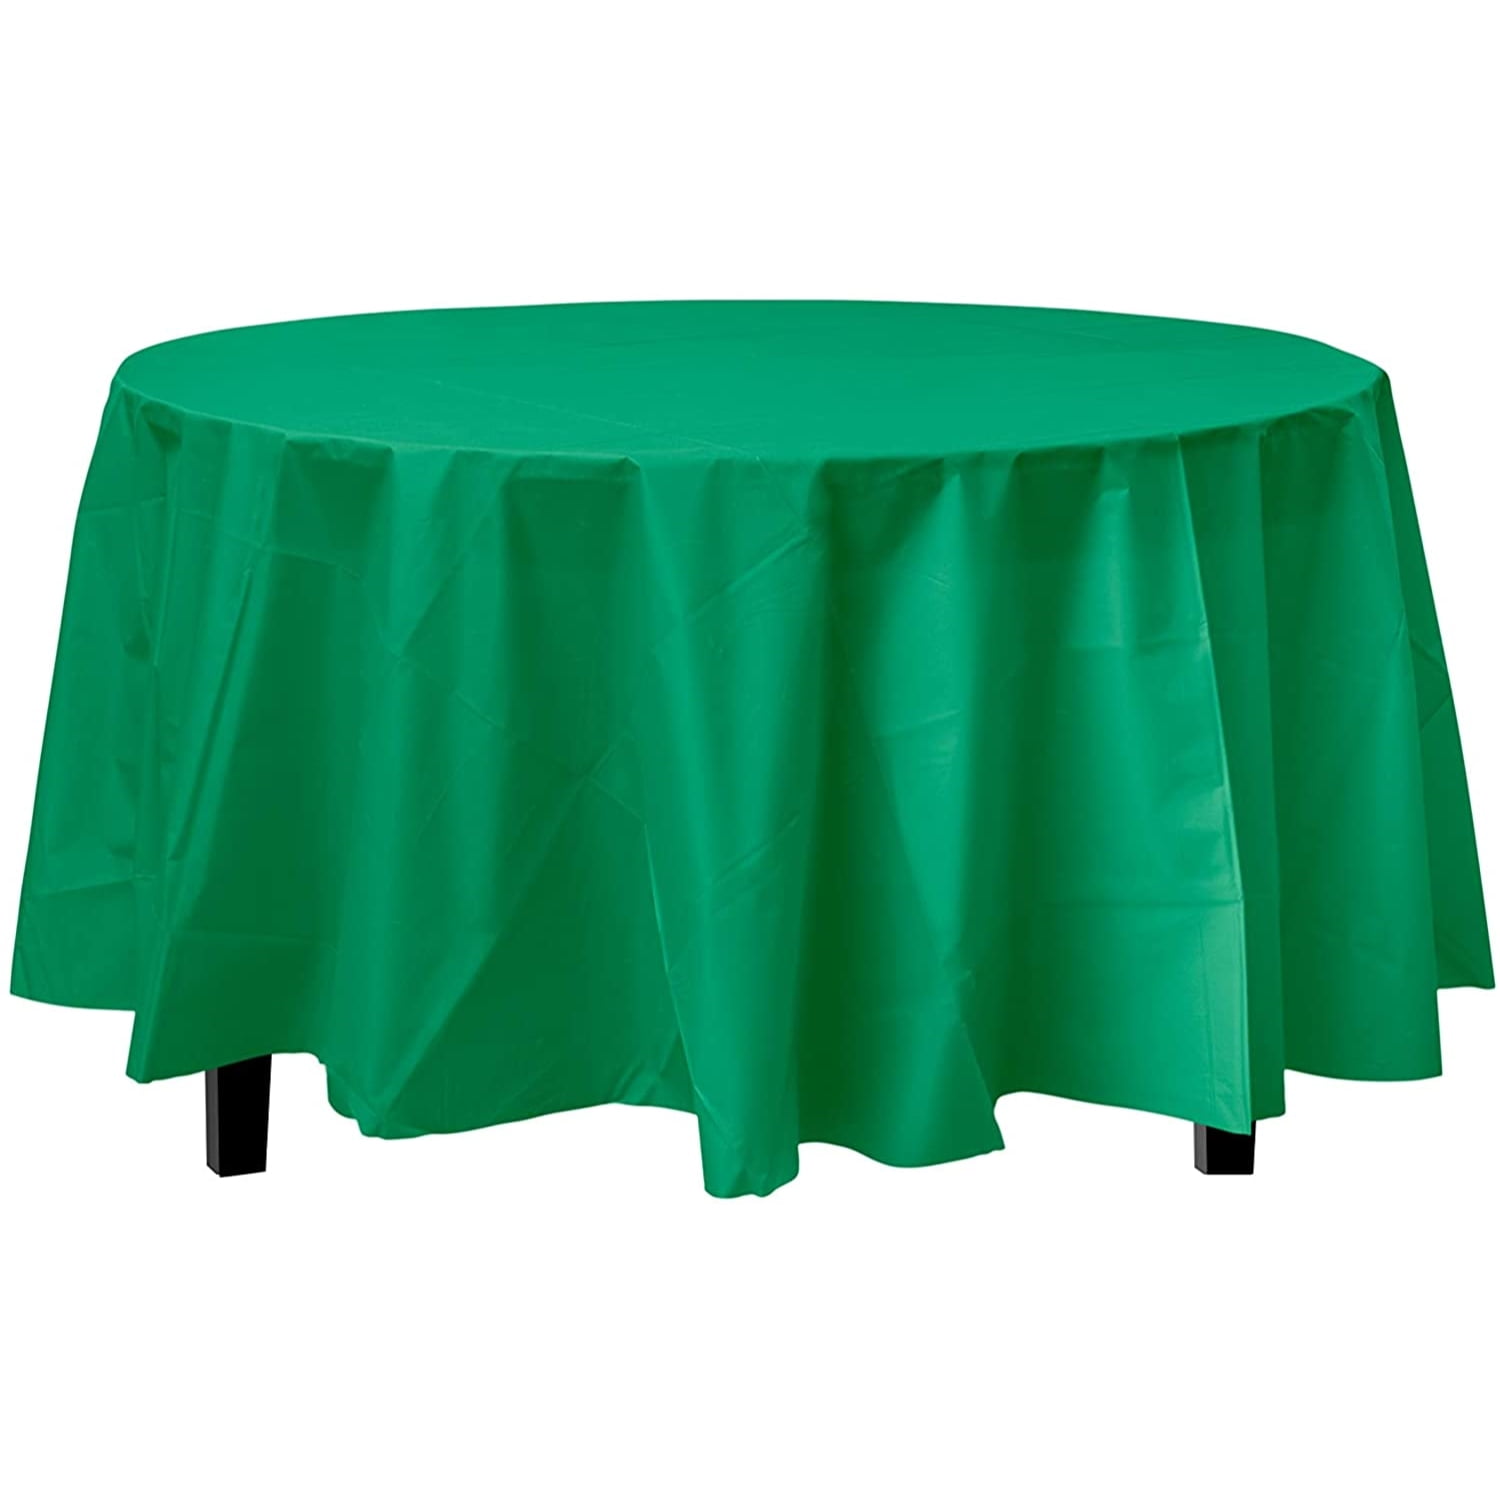 Round Table Covers, 20 Inch Round Tablecloth